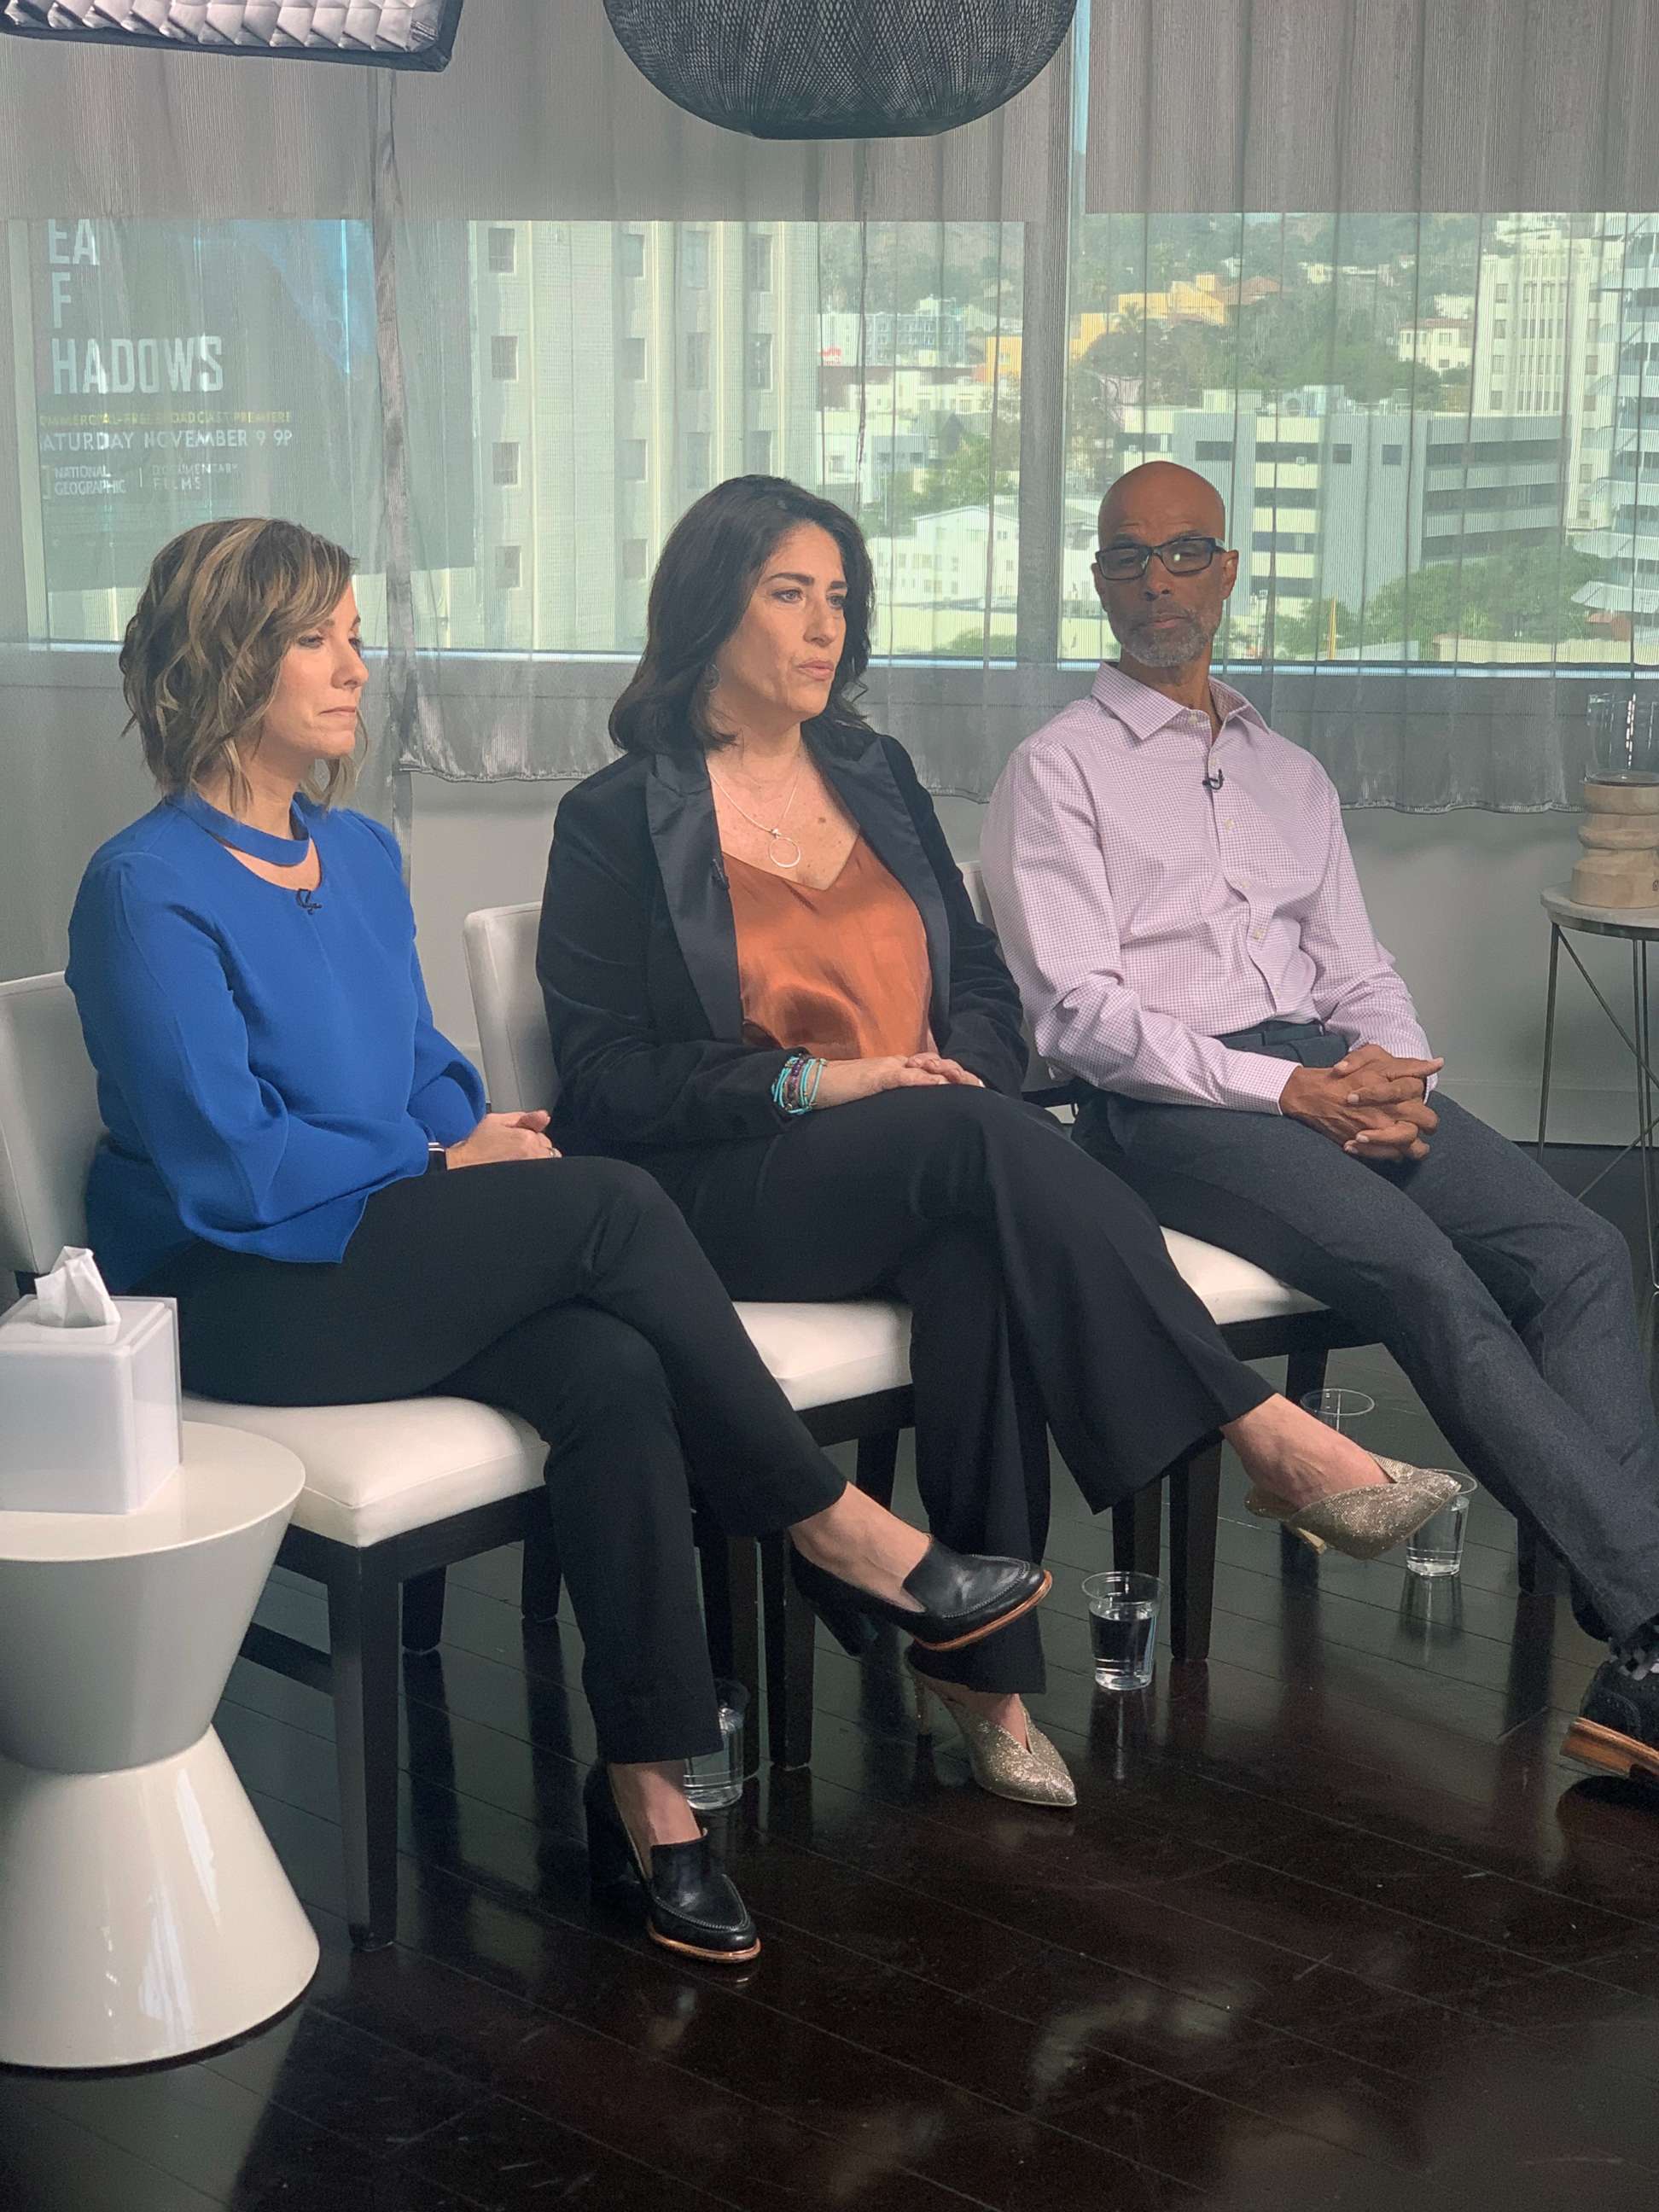 PHOTO: Libby Boyce and Victor Boyce, parents of the late Disney star, Cameron Boyce. speak out with senior director of the SUDEP institute, Sally Schaeffer, about a new PSA about sudden unexpected death in epilepsy awareness.